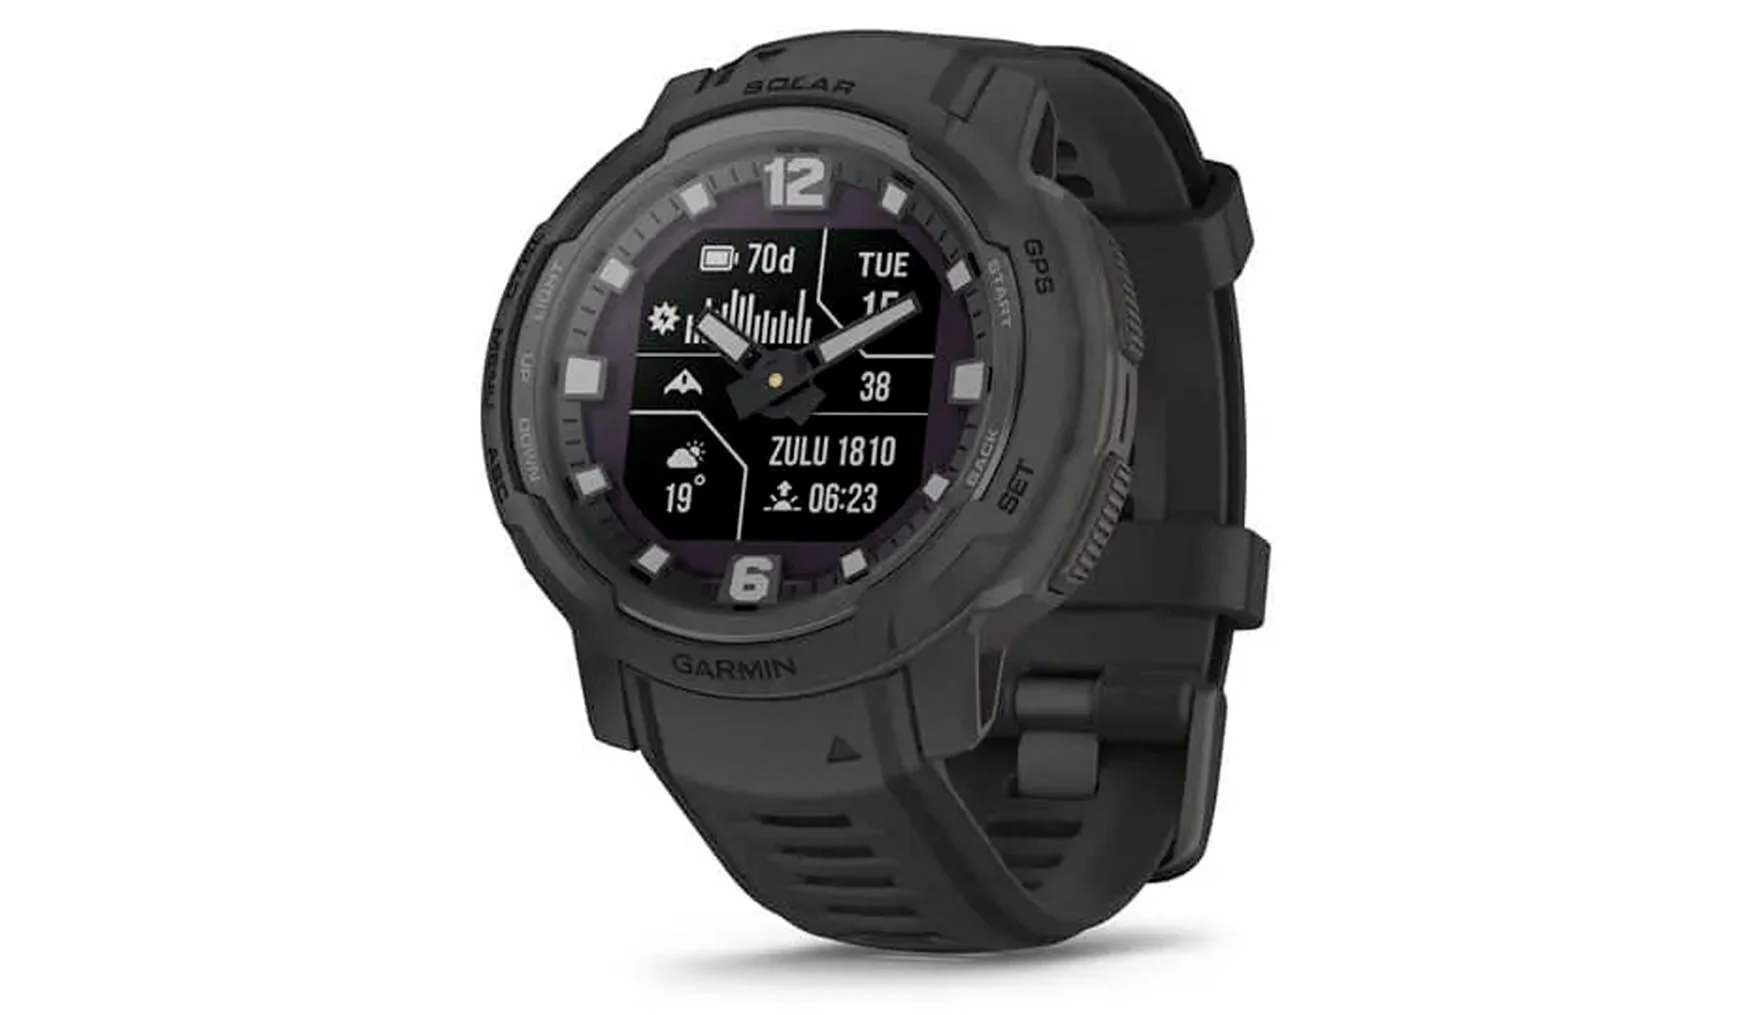 Garmin's latest Instinct Crossover has a whopping 70-day battery life